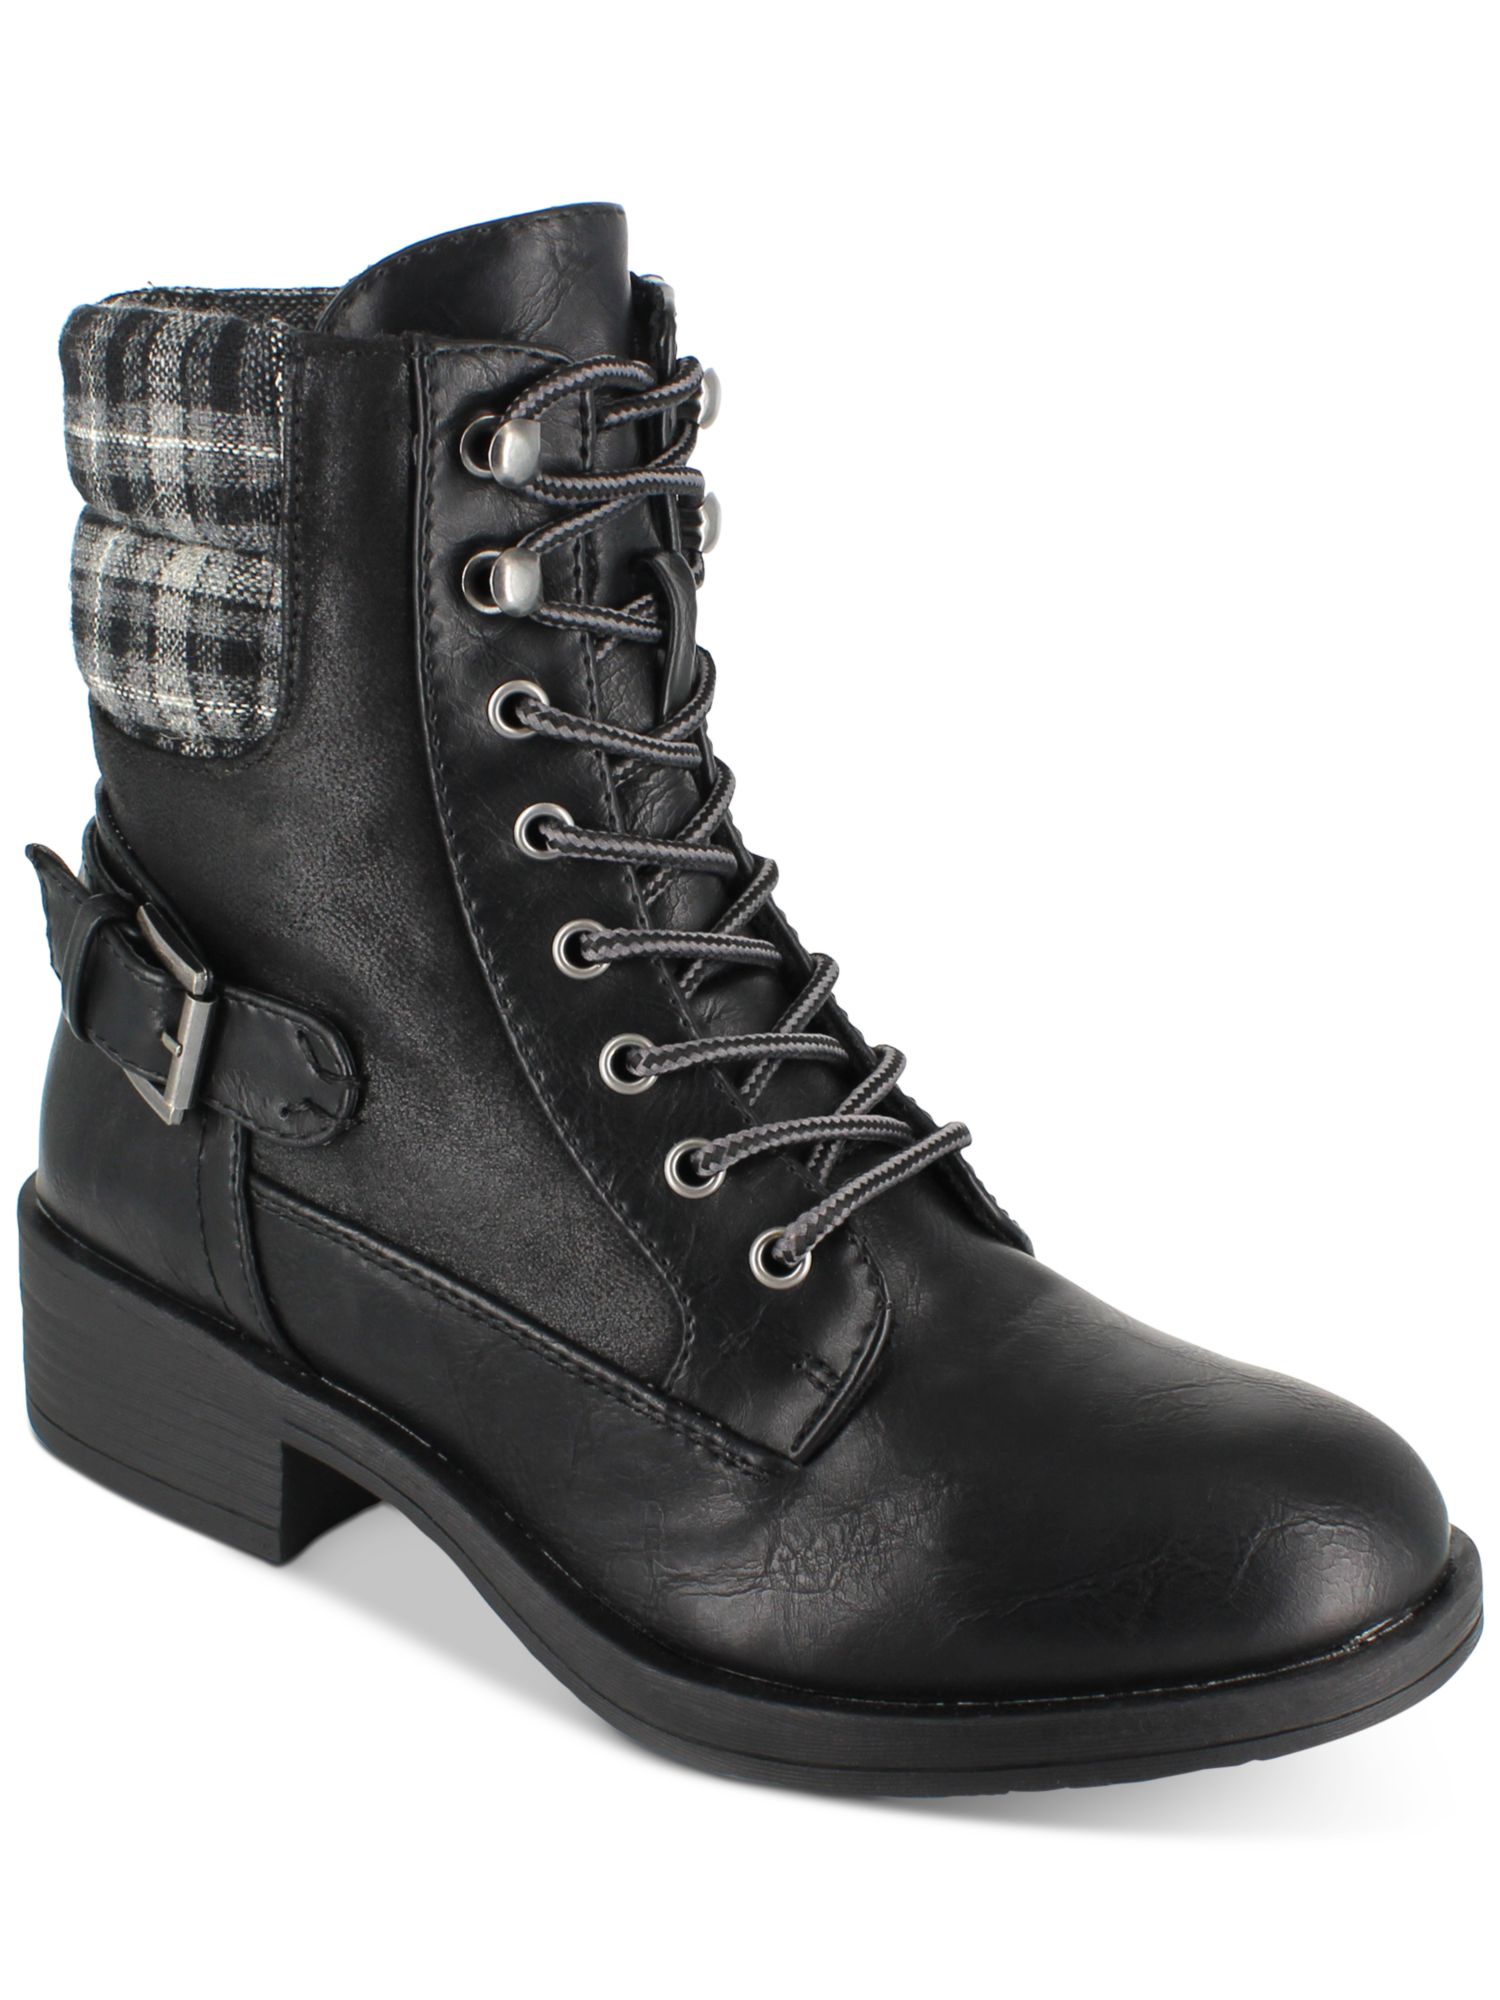 ROCK & CANDY Womens Black Flannel Padded Collar Strap Buckle Accent Cushioned Eyelet Jerrie Round Toe Block Heel Lace-Up Boots 7